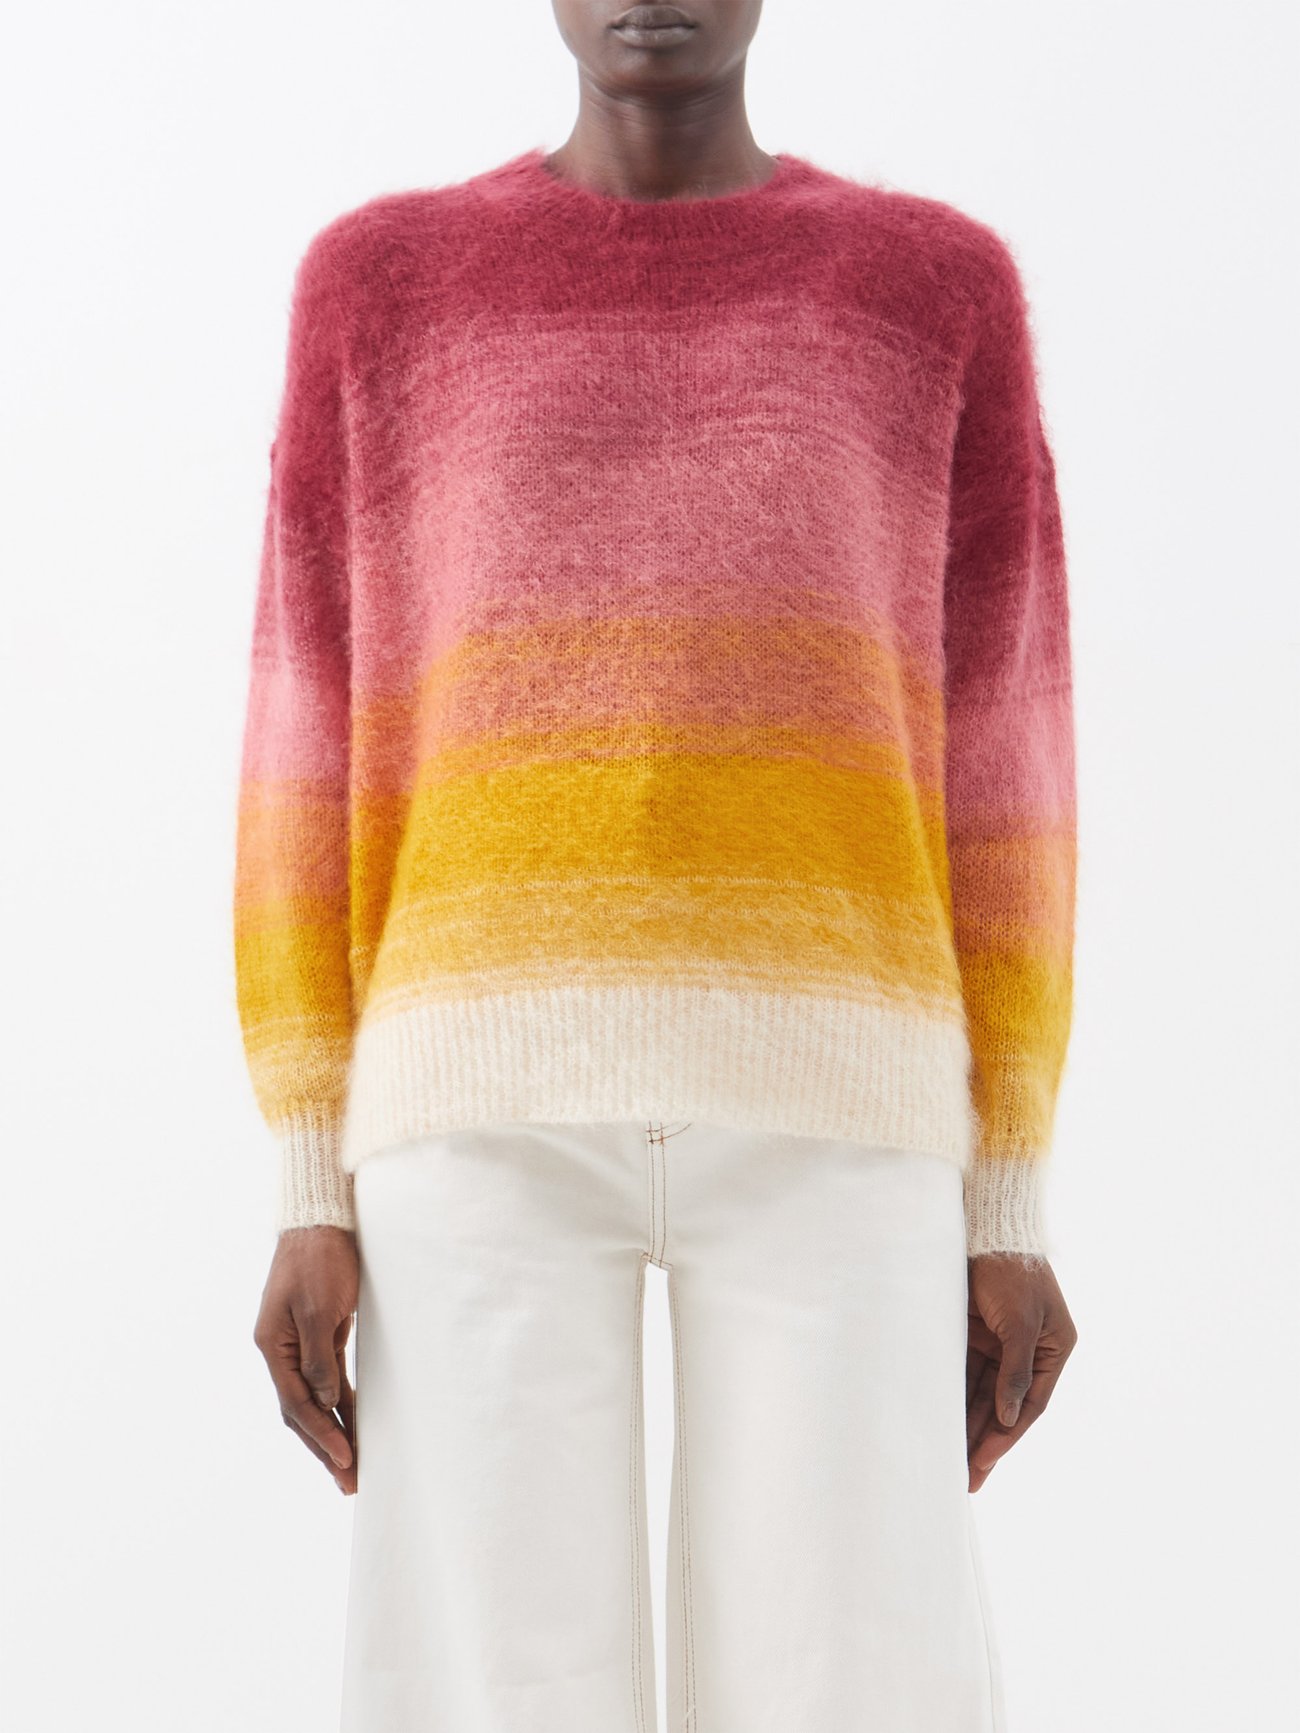 Isabel Marant's Drussell sweater is made in Italy and knitted from a mohair blend, giving a soft-focus fuzz to the warm pink and yellow dégradé hues.